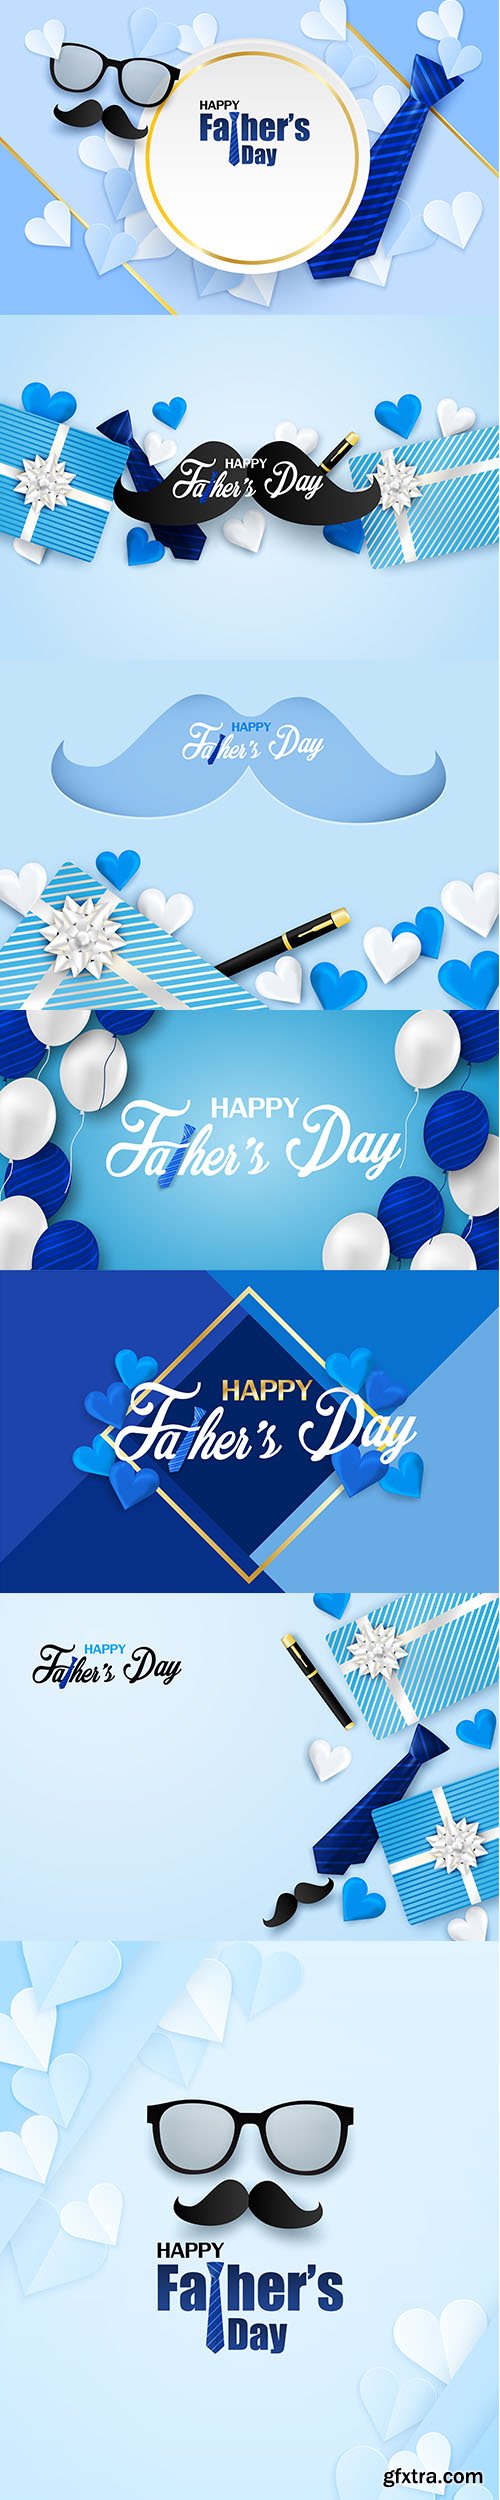 Vector Backgrounds - Happy Fathers Day